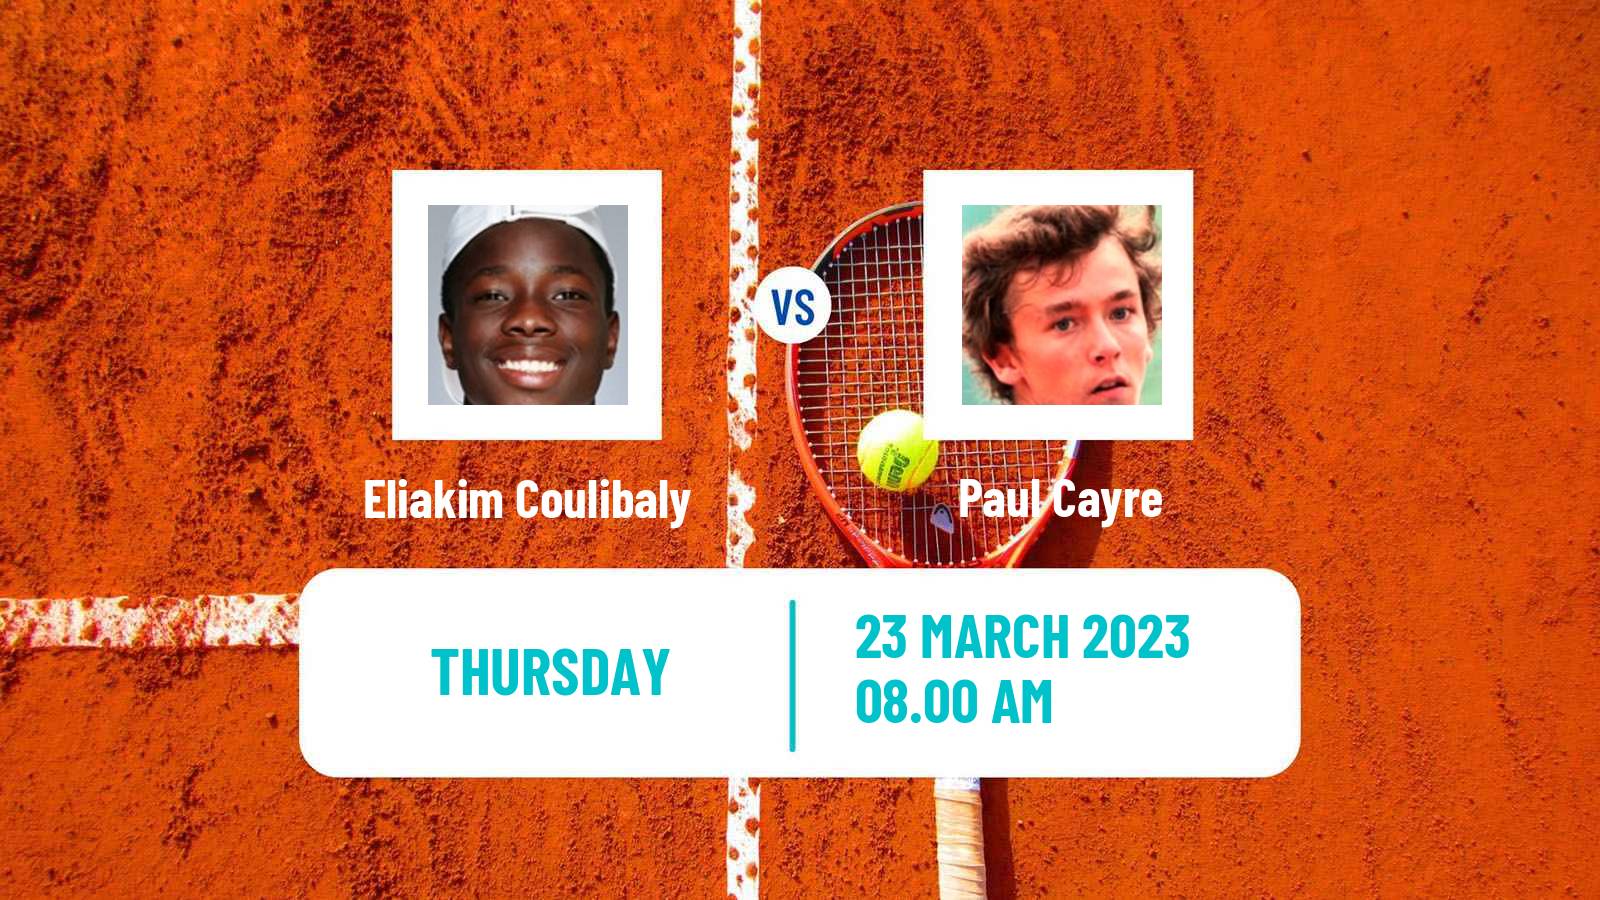 Tennis ITF Tournaments Eliakim Coulibaly - Paul Cayre